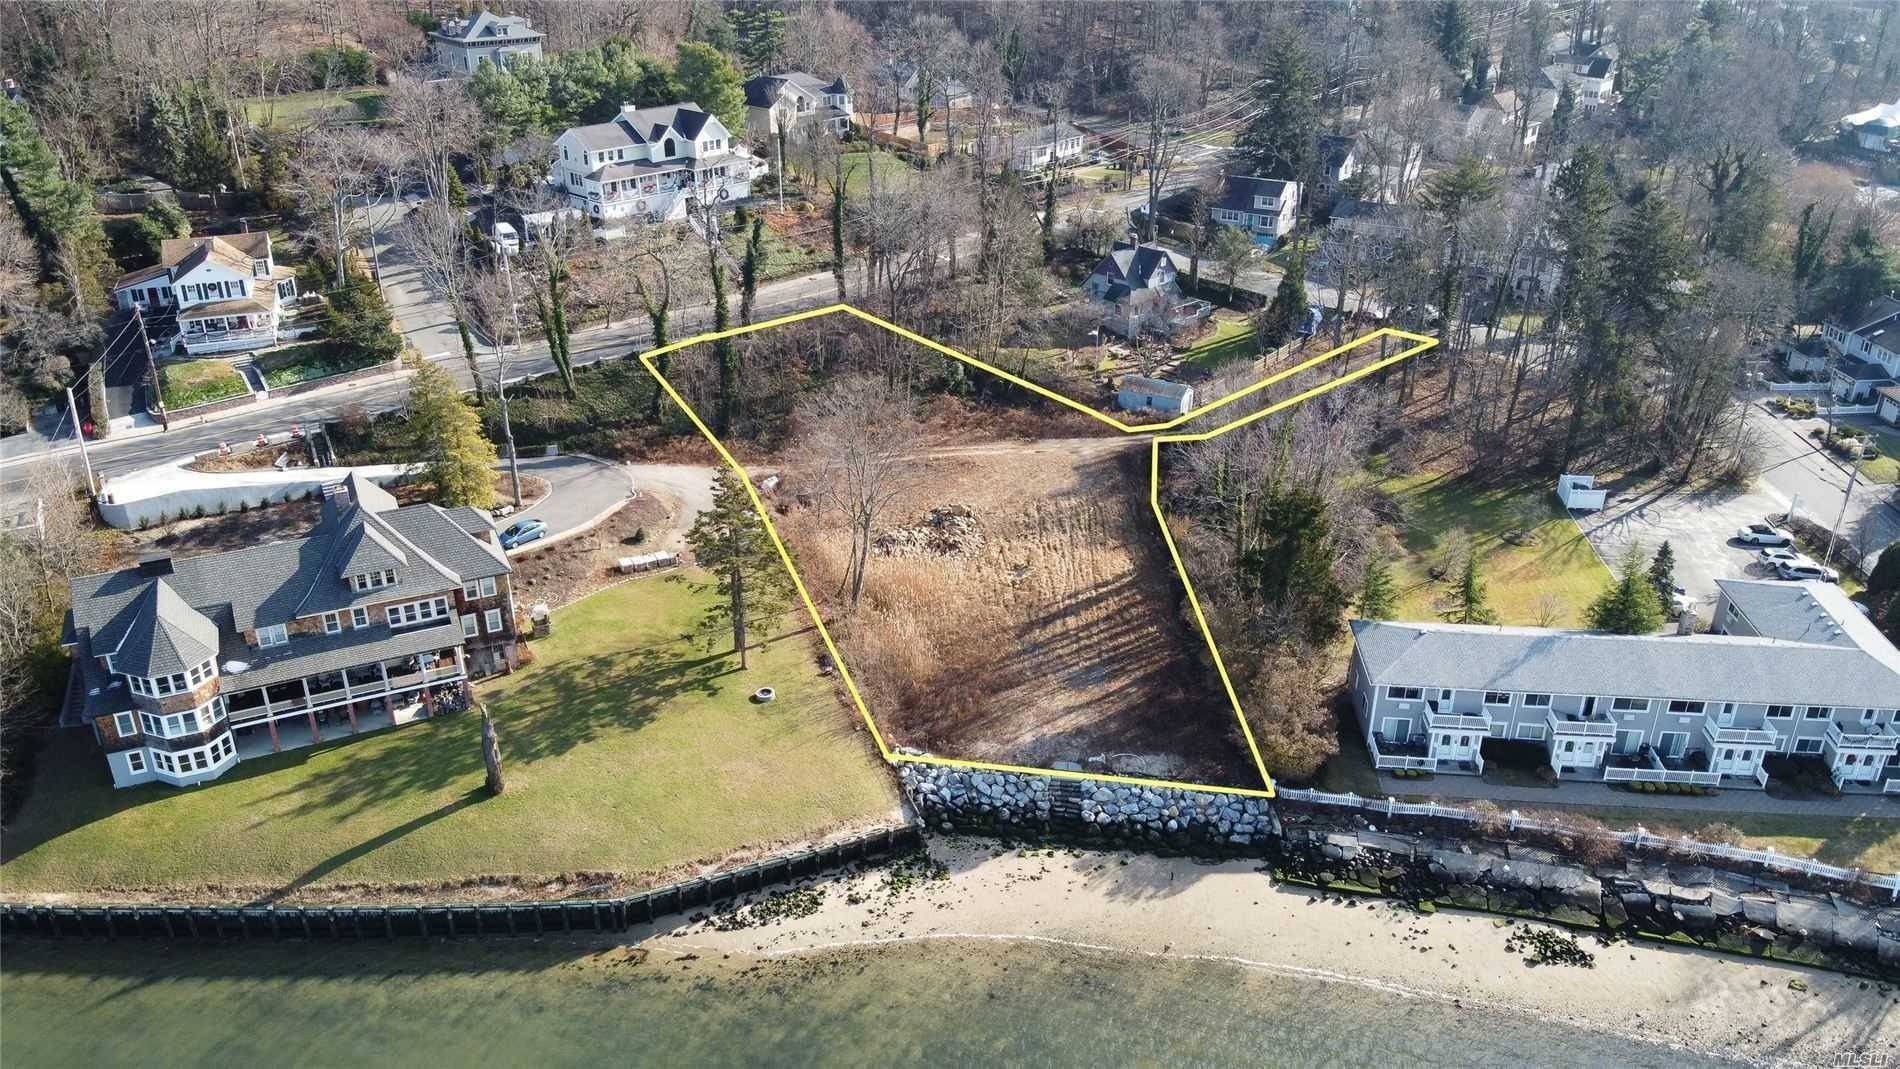 Waterfront opportunity to build your dream home in Northport Village on the harbor with unobstructed views.